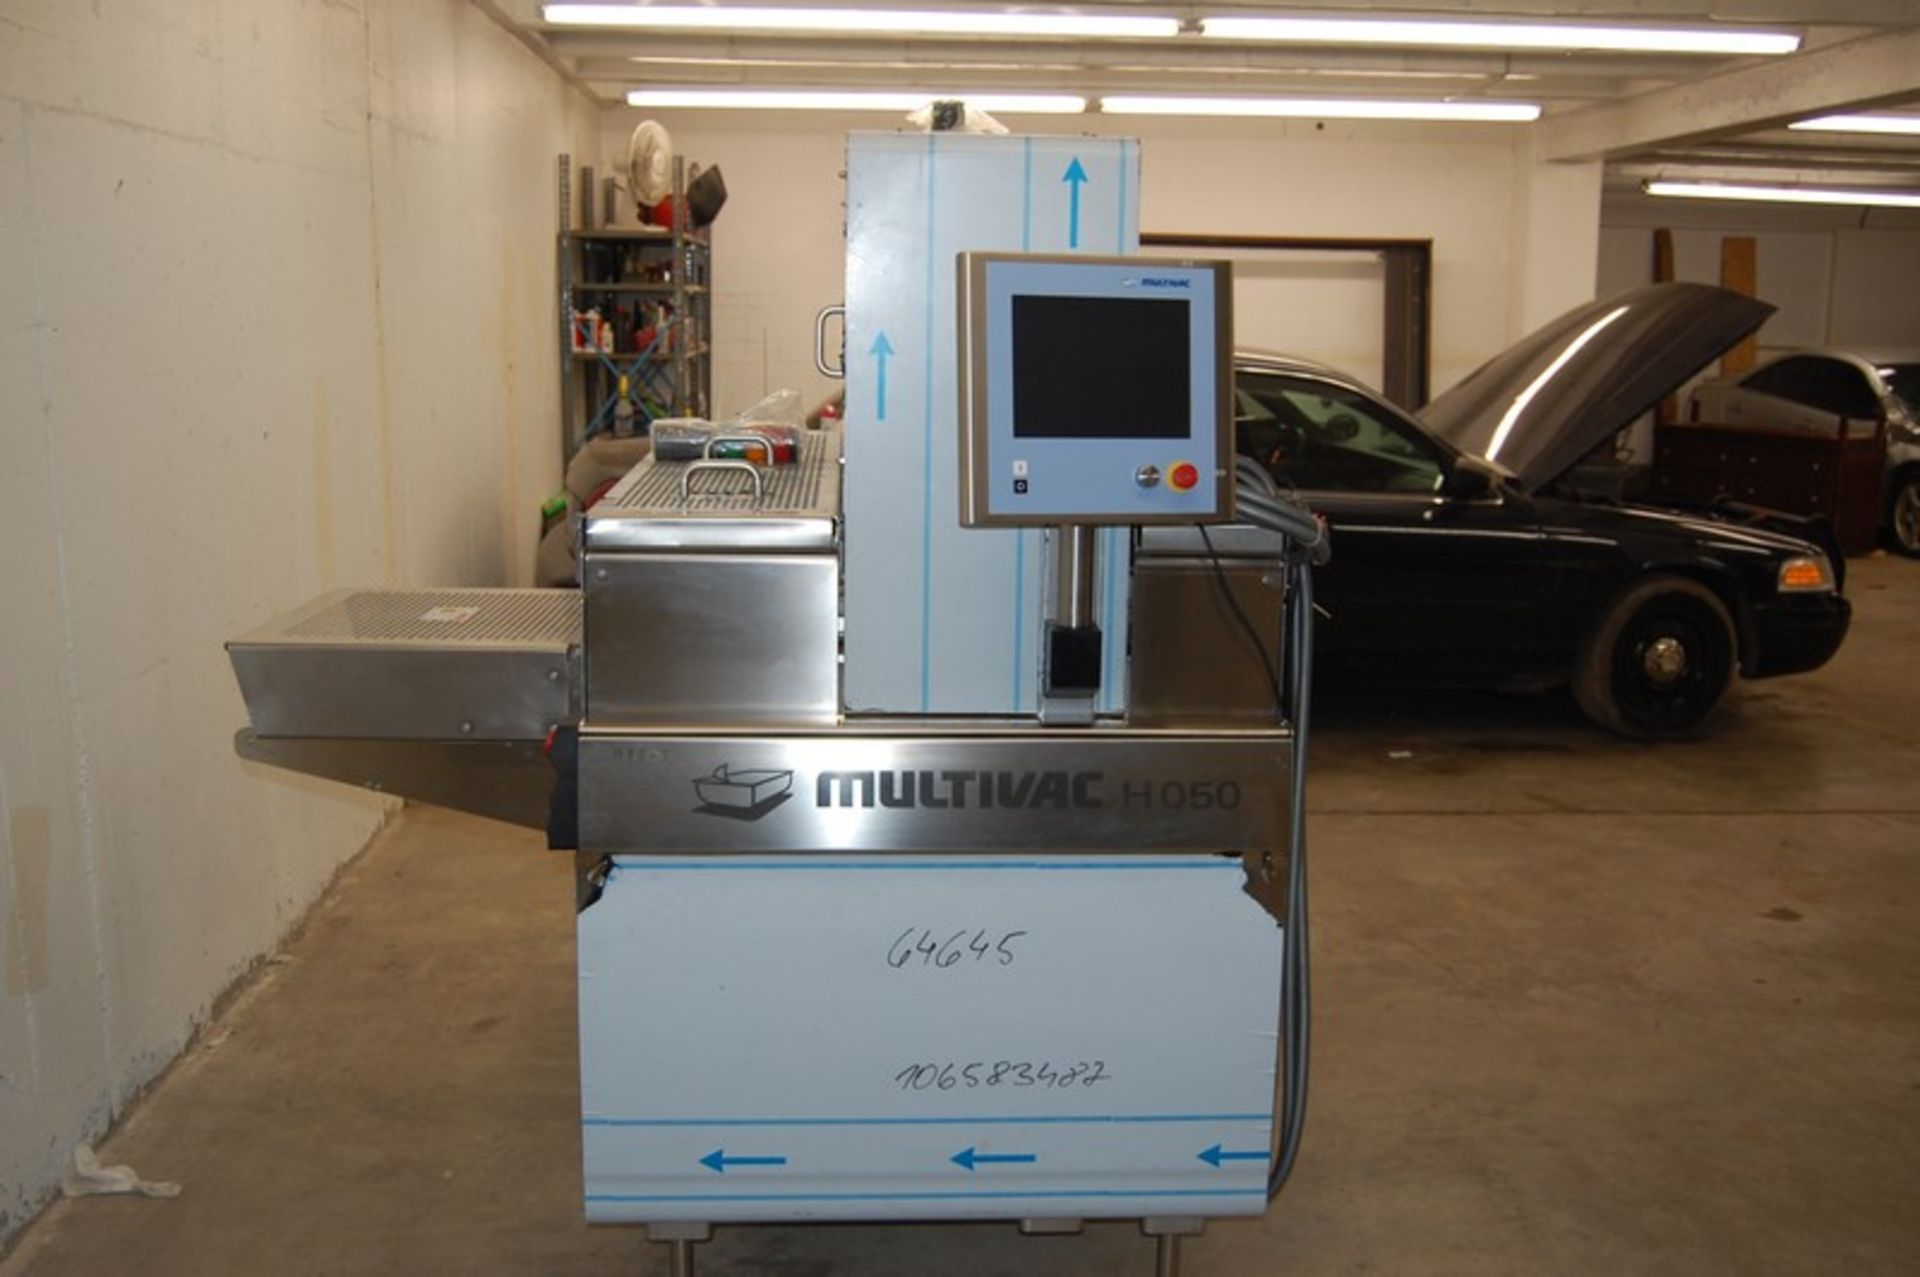 NEW 2012 MultiVac Vacuum Packager, Type: H050, S/N 158612, 208/120 Volts (LOCATED IN BELTSVILLE, MD) - Image 13 of 14